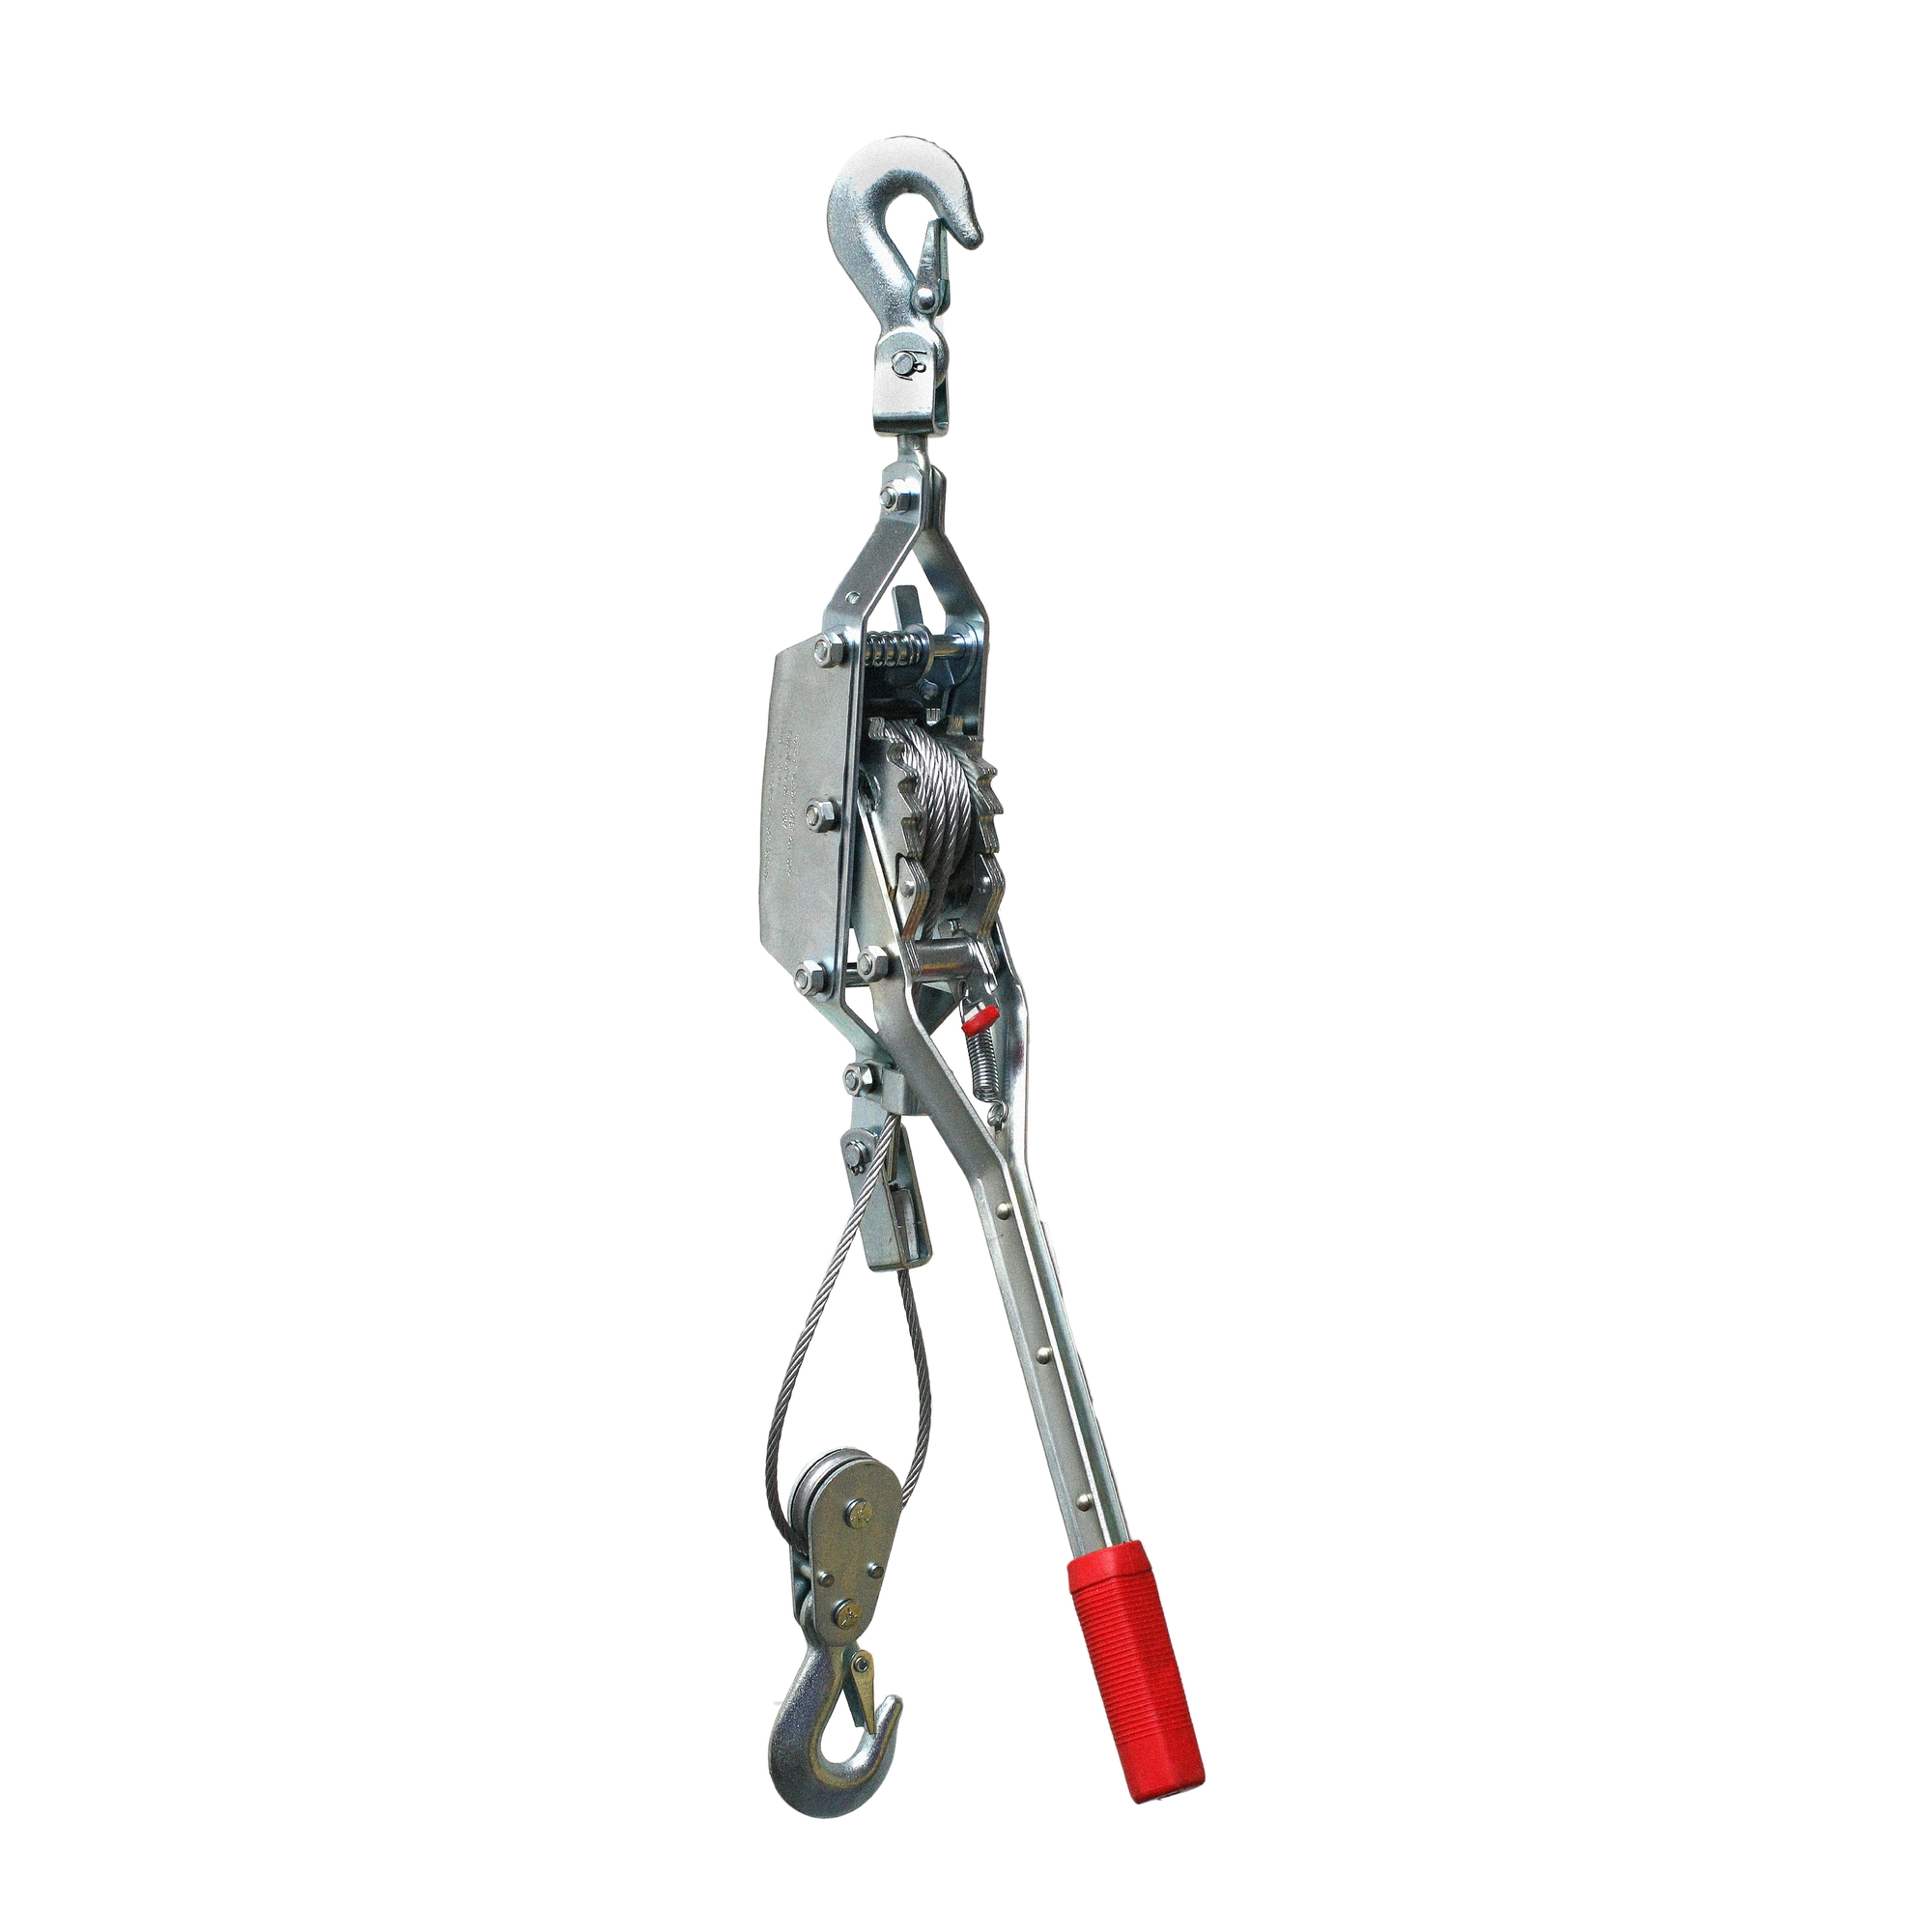 2 Ton Consumer Grade Cable Puller, Amps 0, Single Line Lift Capacity 0 lb, Double Line Lift Capacity 4000 lb, Model - American Power Pull 18600